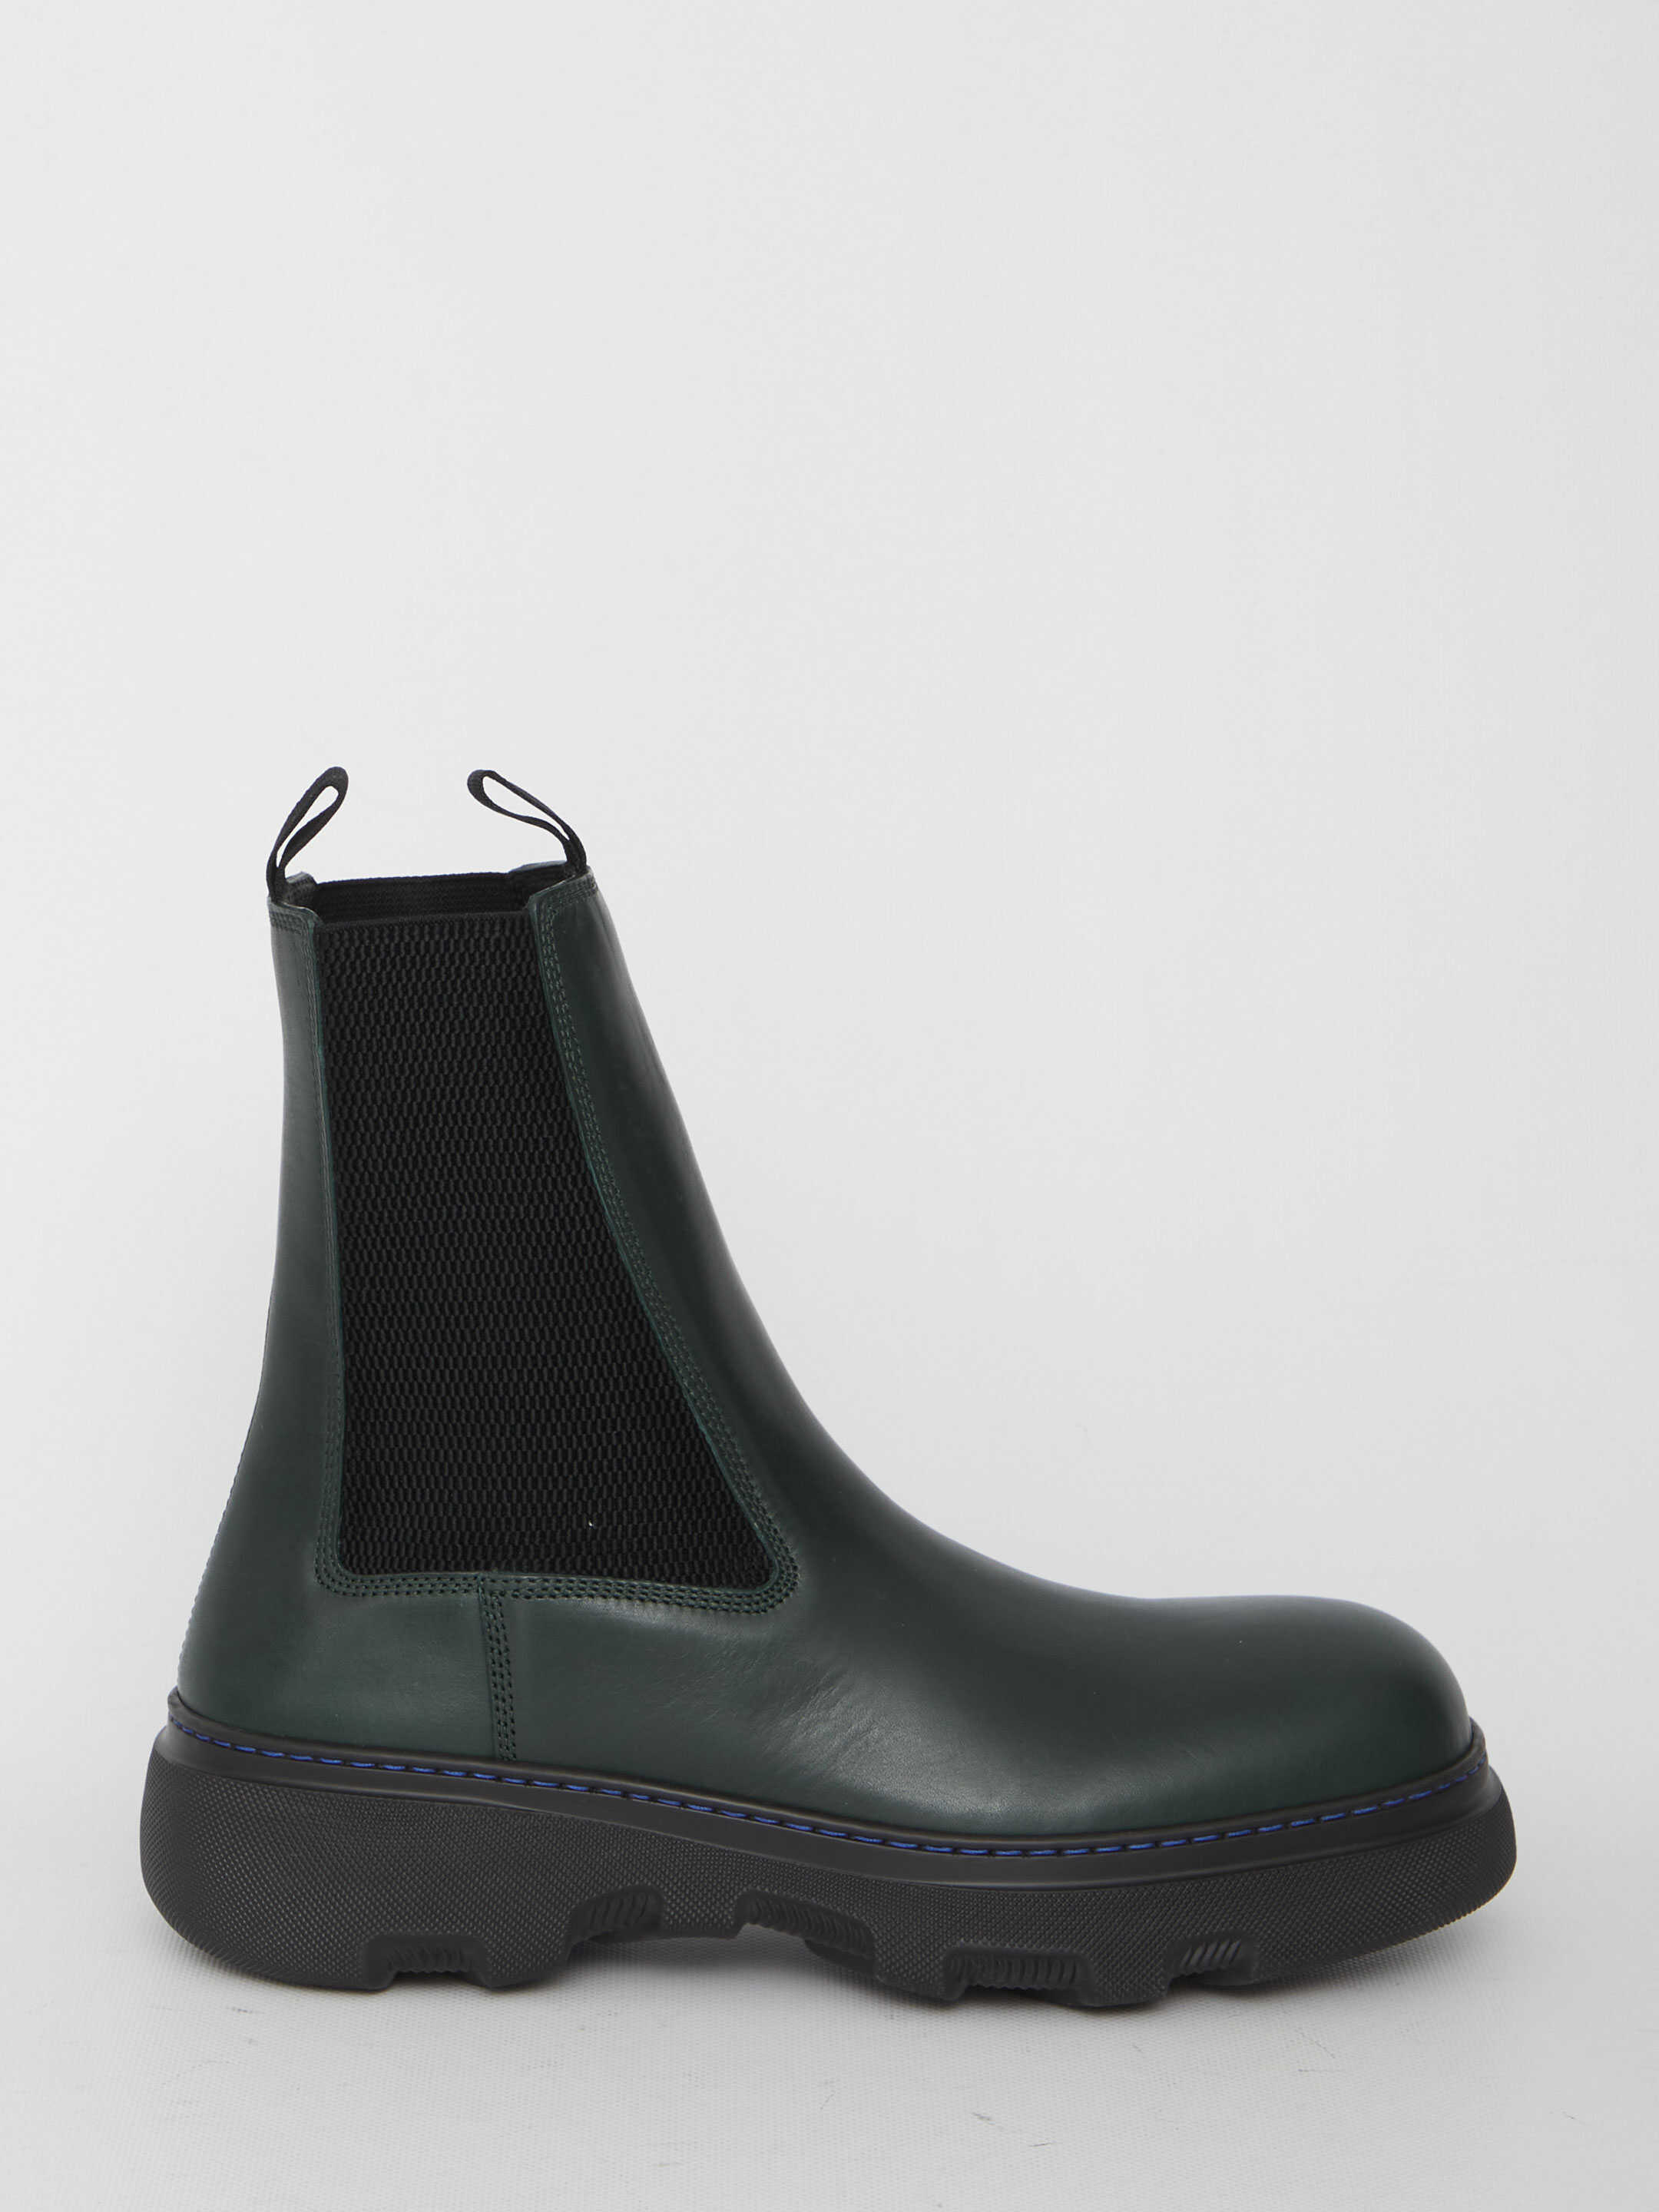 Burberry Creeper Chelsea Boots GREEN